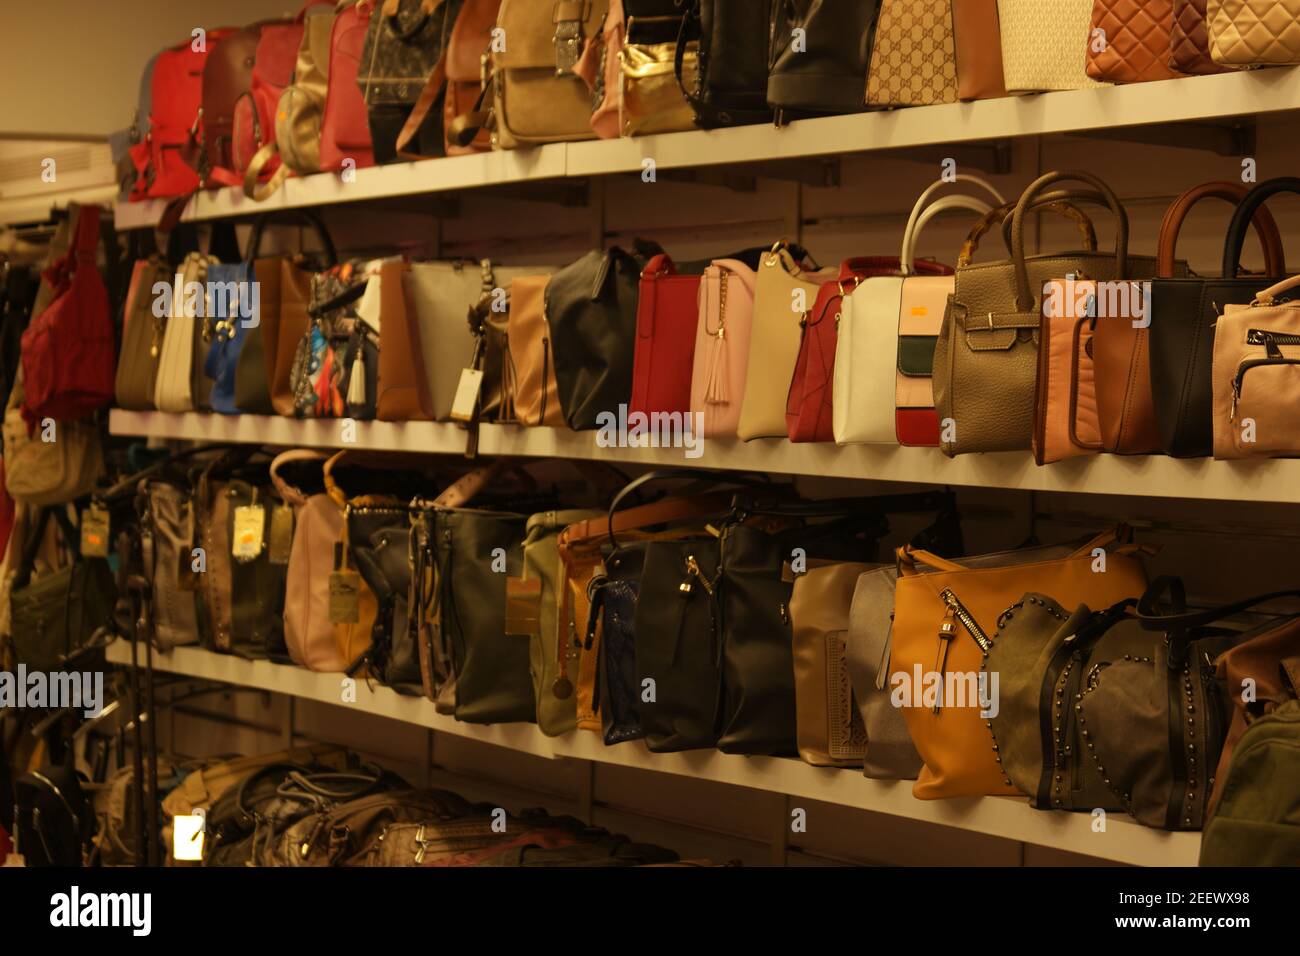 Collection of handbags on display at shopping center Stock Photo